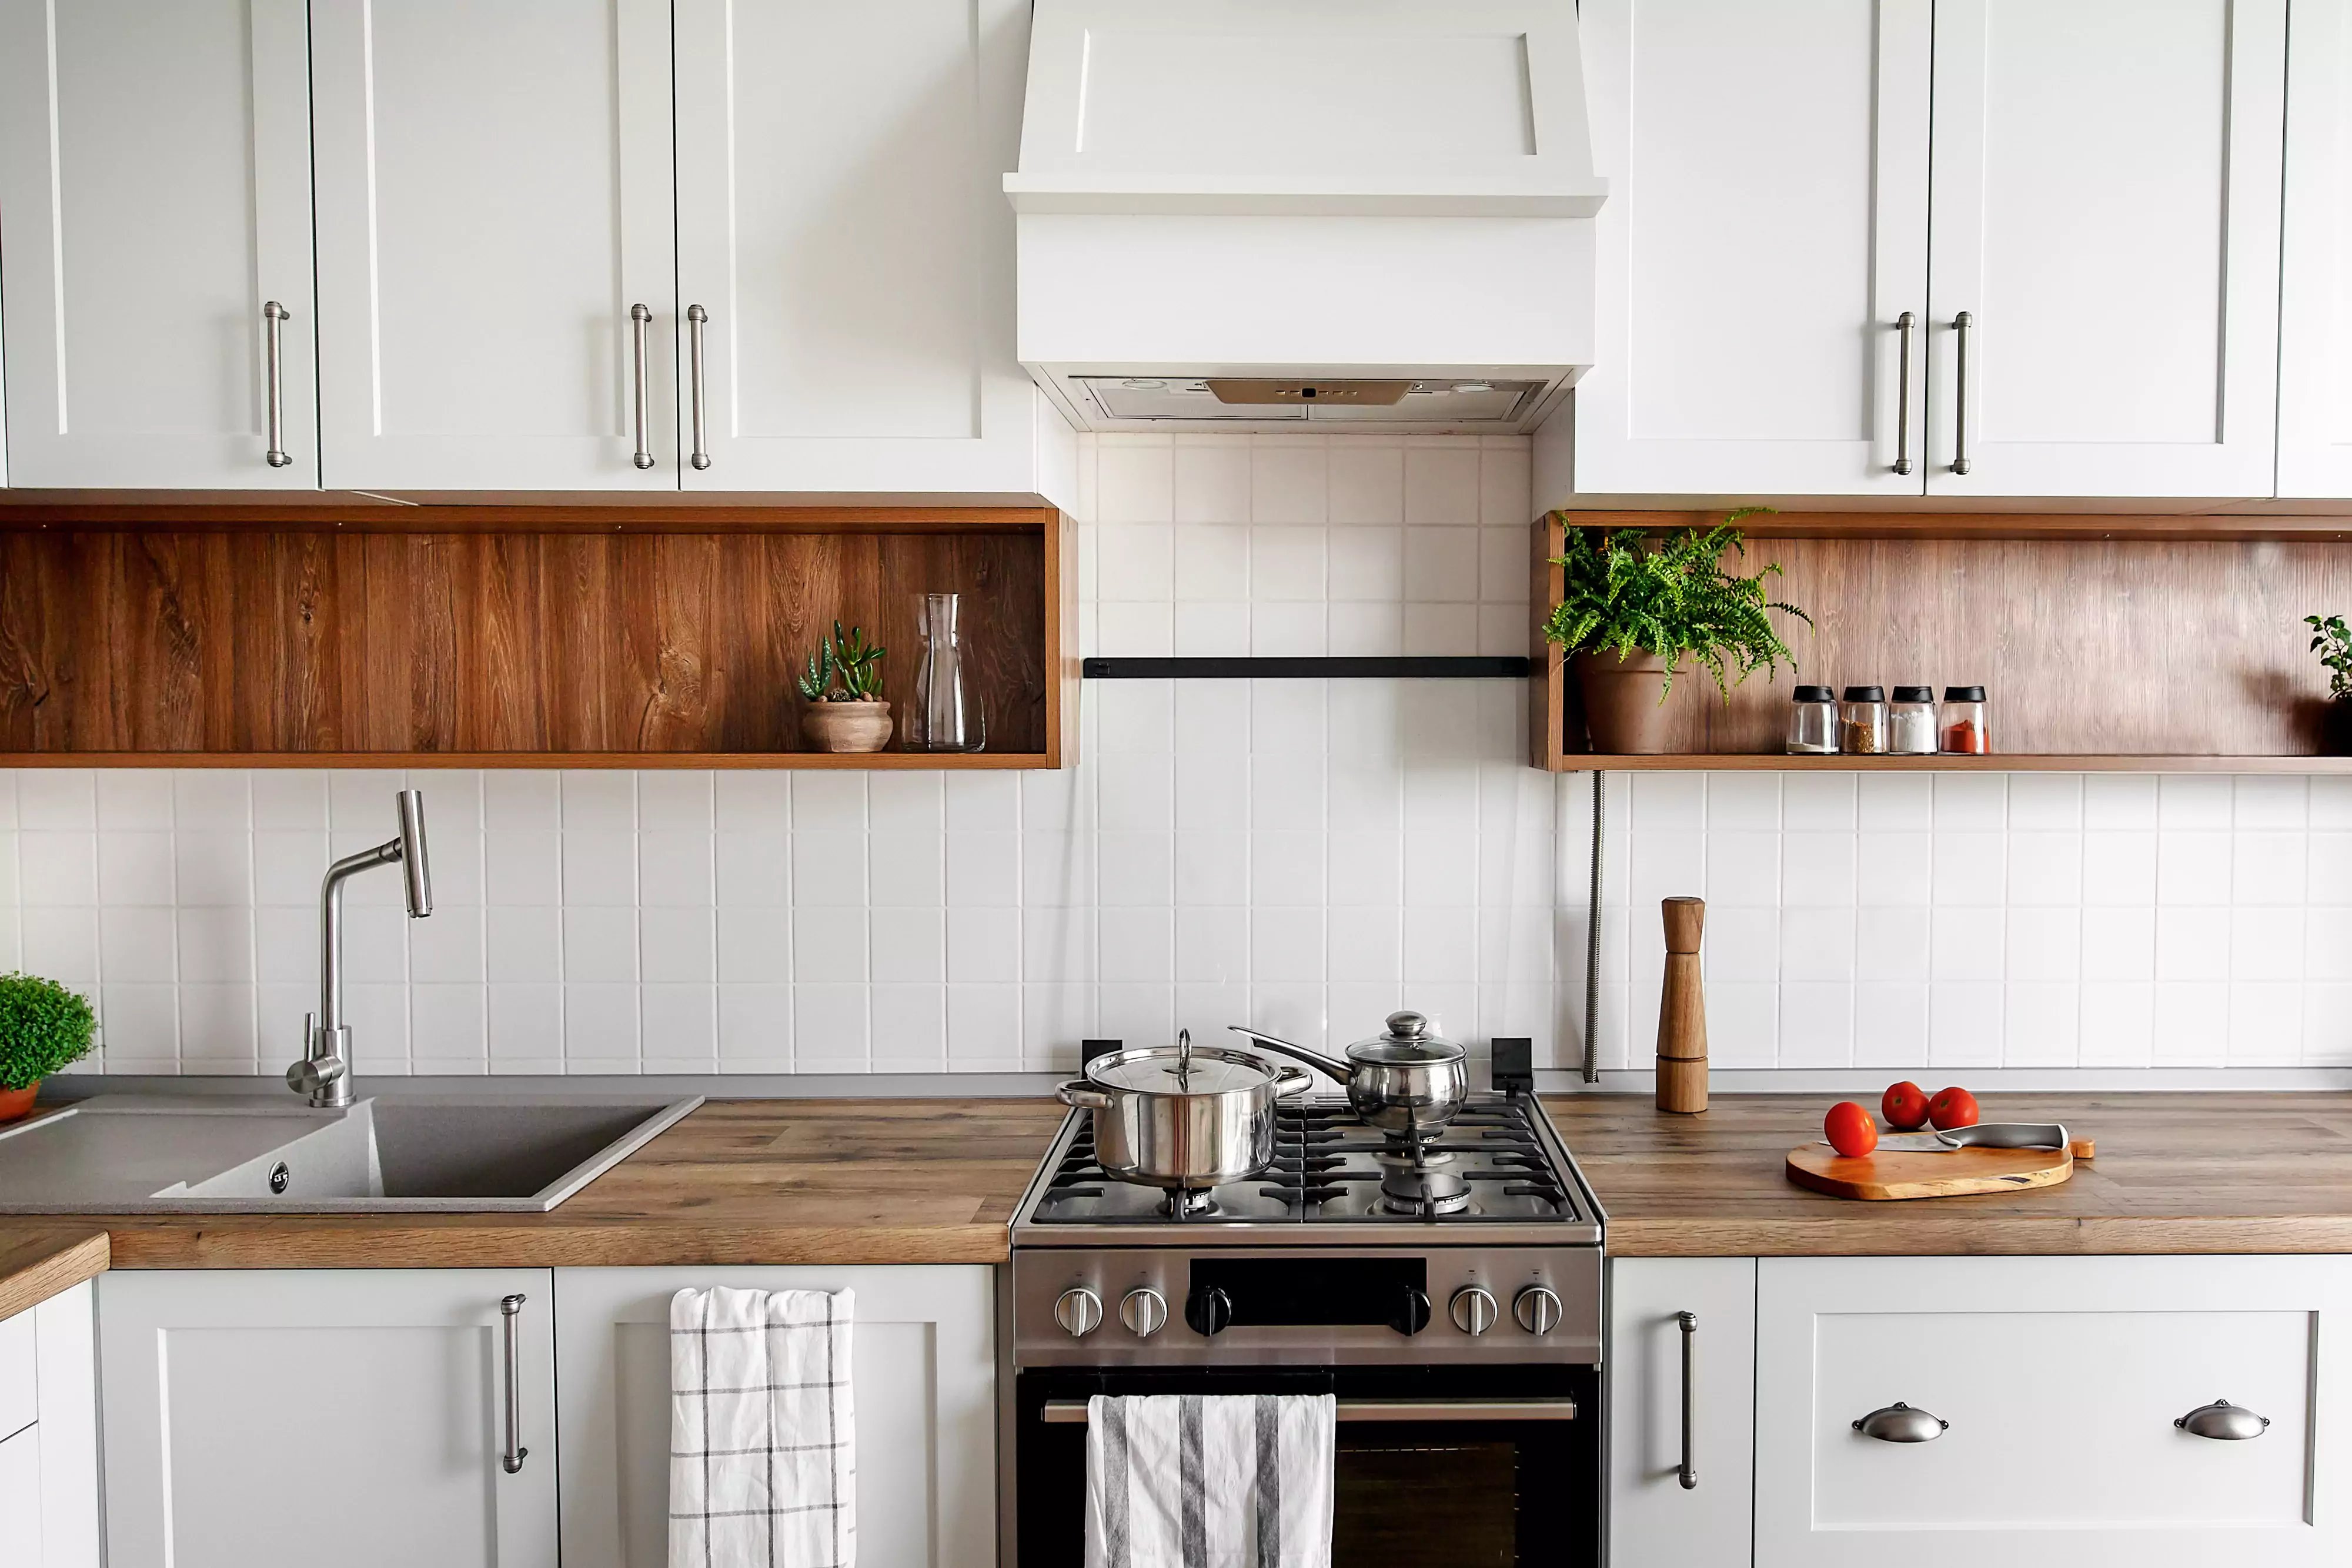 Create an Upscale Cooking Space With Shaker Cabinets: Get the right hardware.